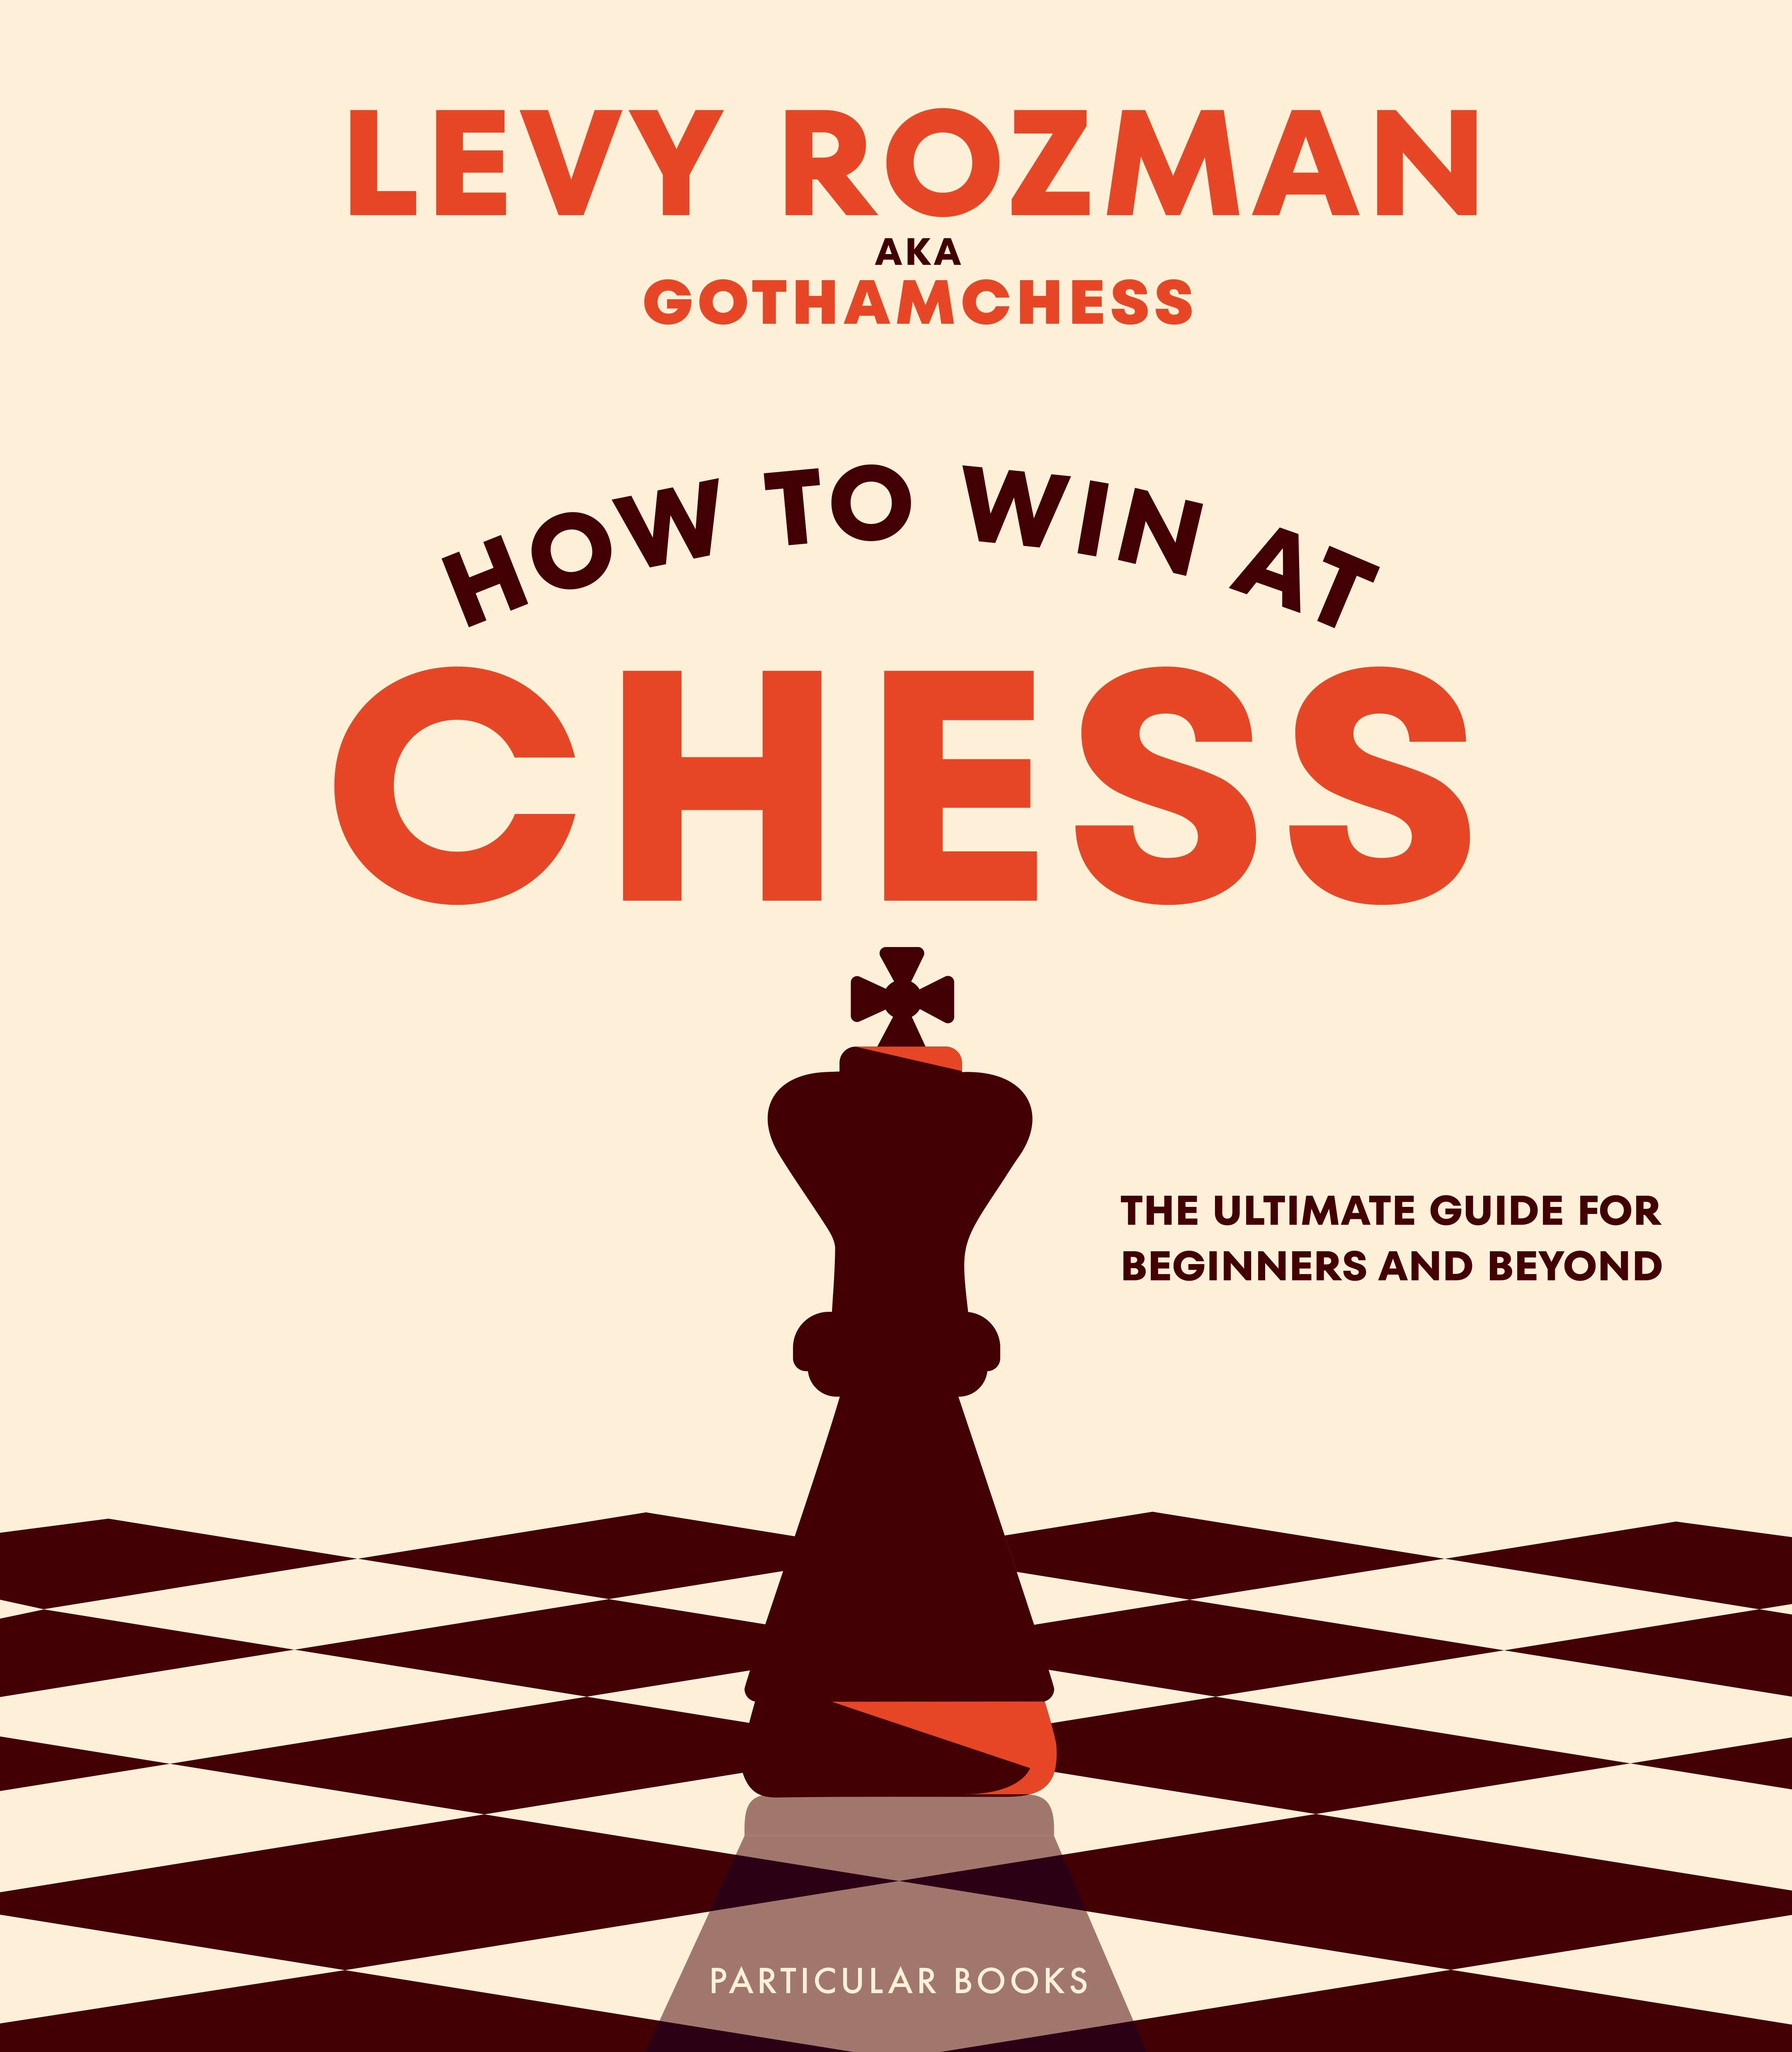 The Chess Bible : 4 Books in 1: The Most Complete Guide to Beat